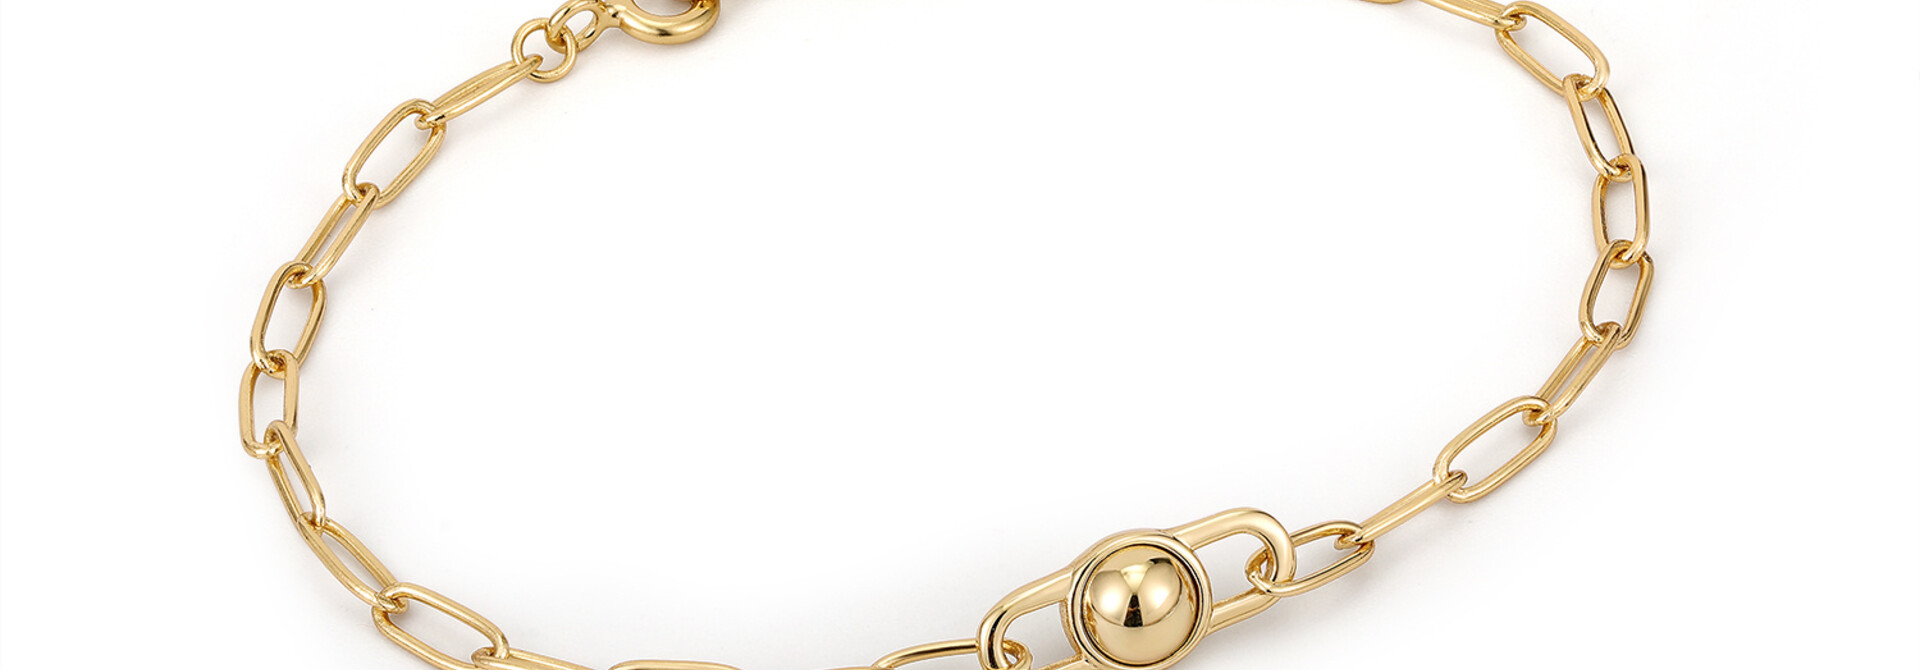 Orb Link Chunky Chain Armband - Gold plated